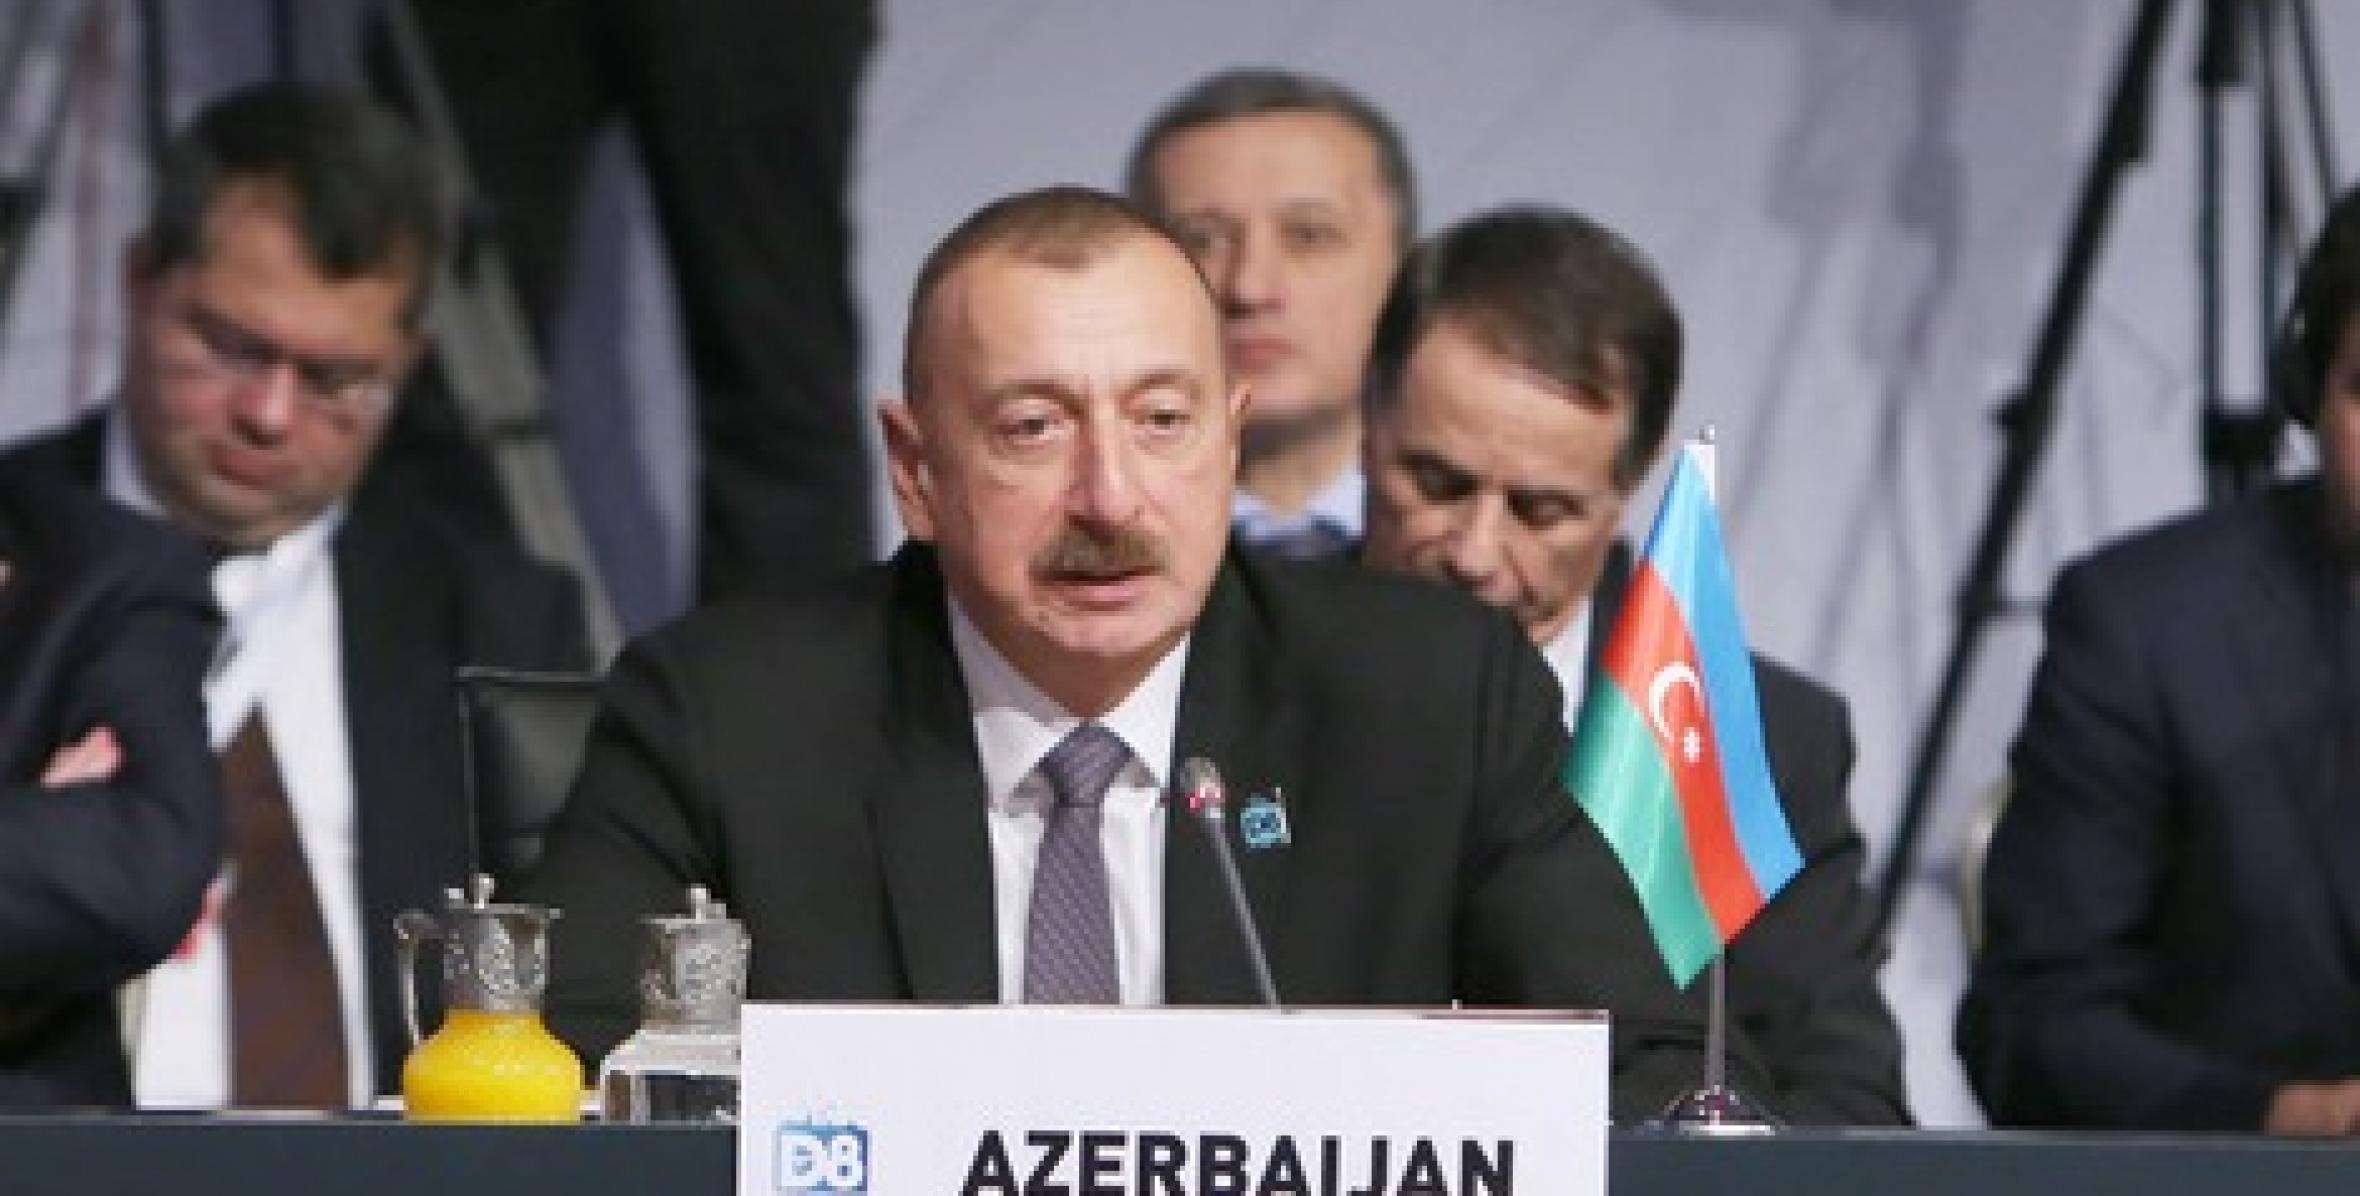 Speech by Ilham Aliyev at  the Summit of D-8 Organization for Economic Cooperation